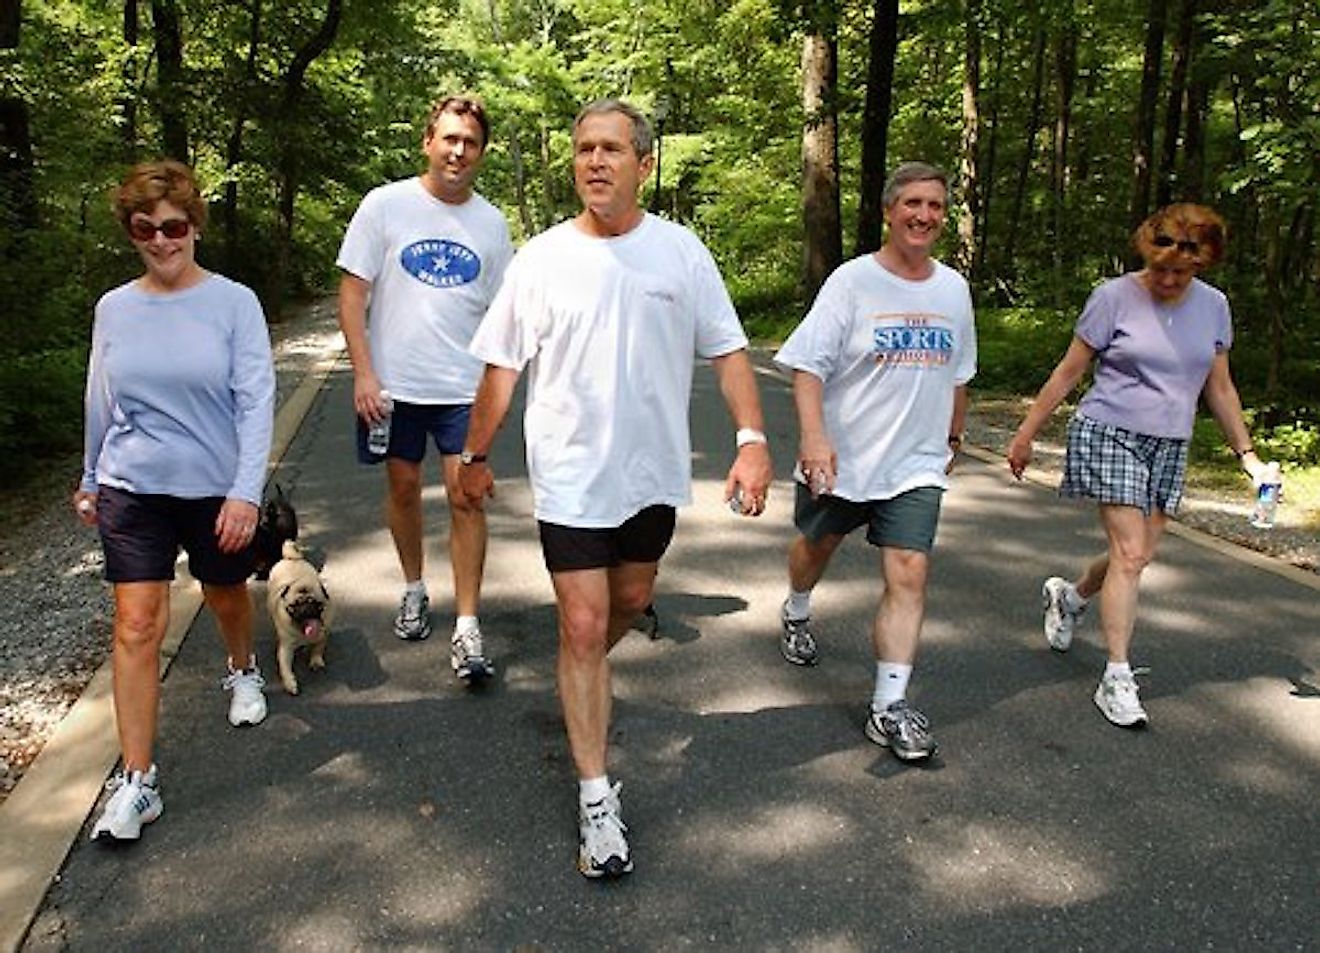 President George W. Bush and First Lady Laura Bush complete a four mile walk. Image credit: White House photo by Eric Draper.